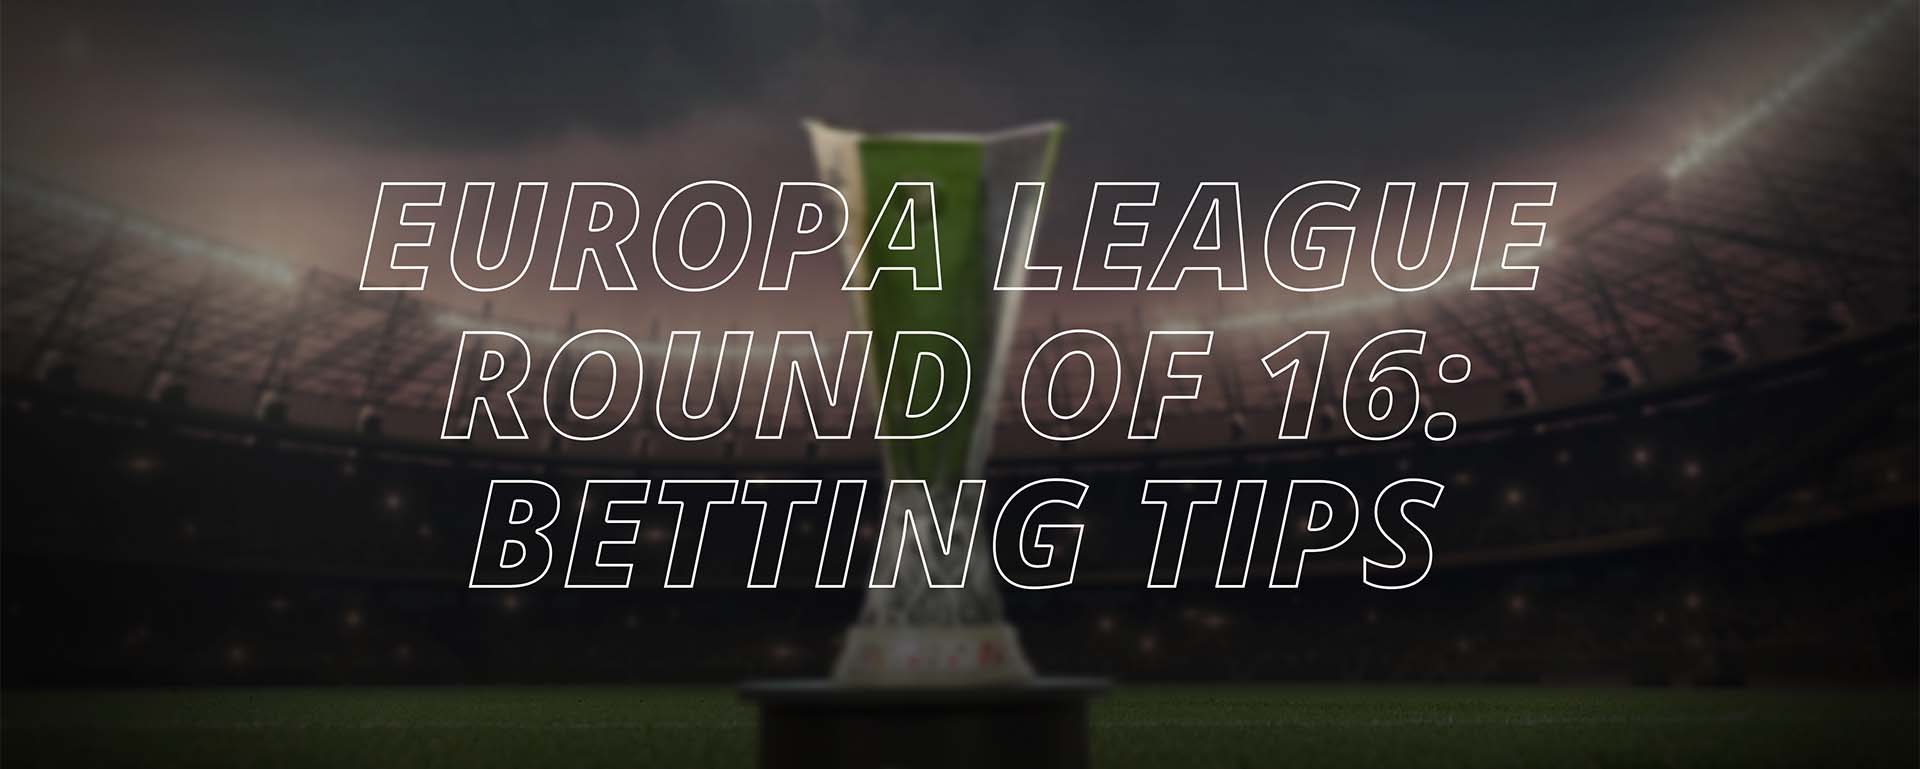 EUROPA LEAGUE ROUND OF 16: BETTING TIPS